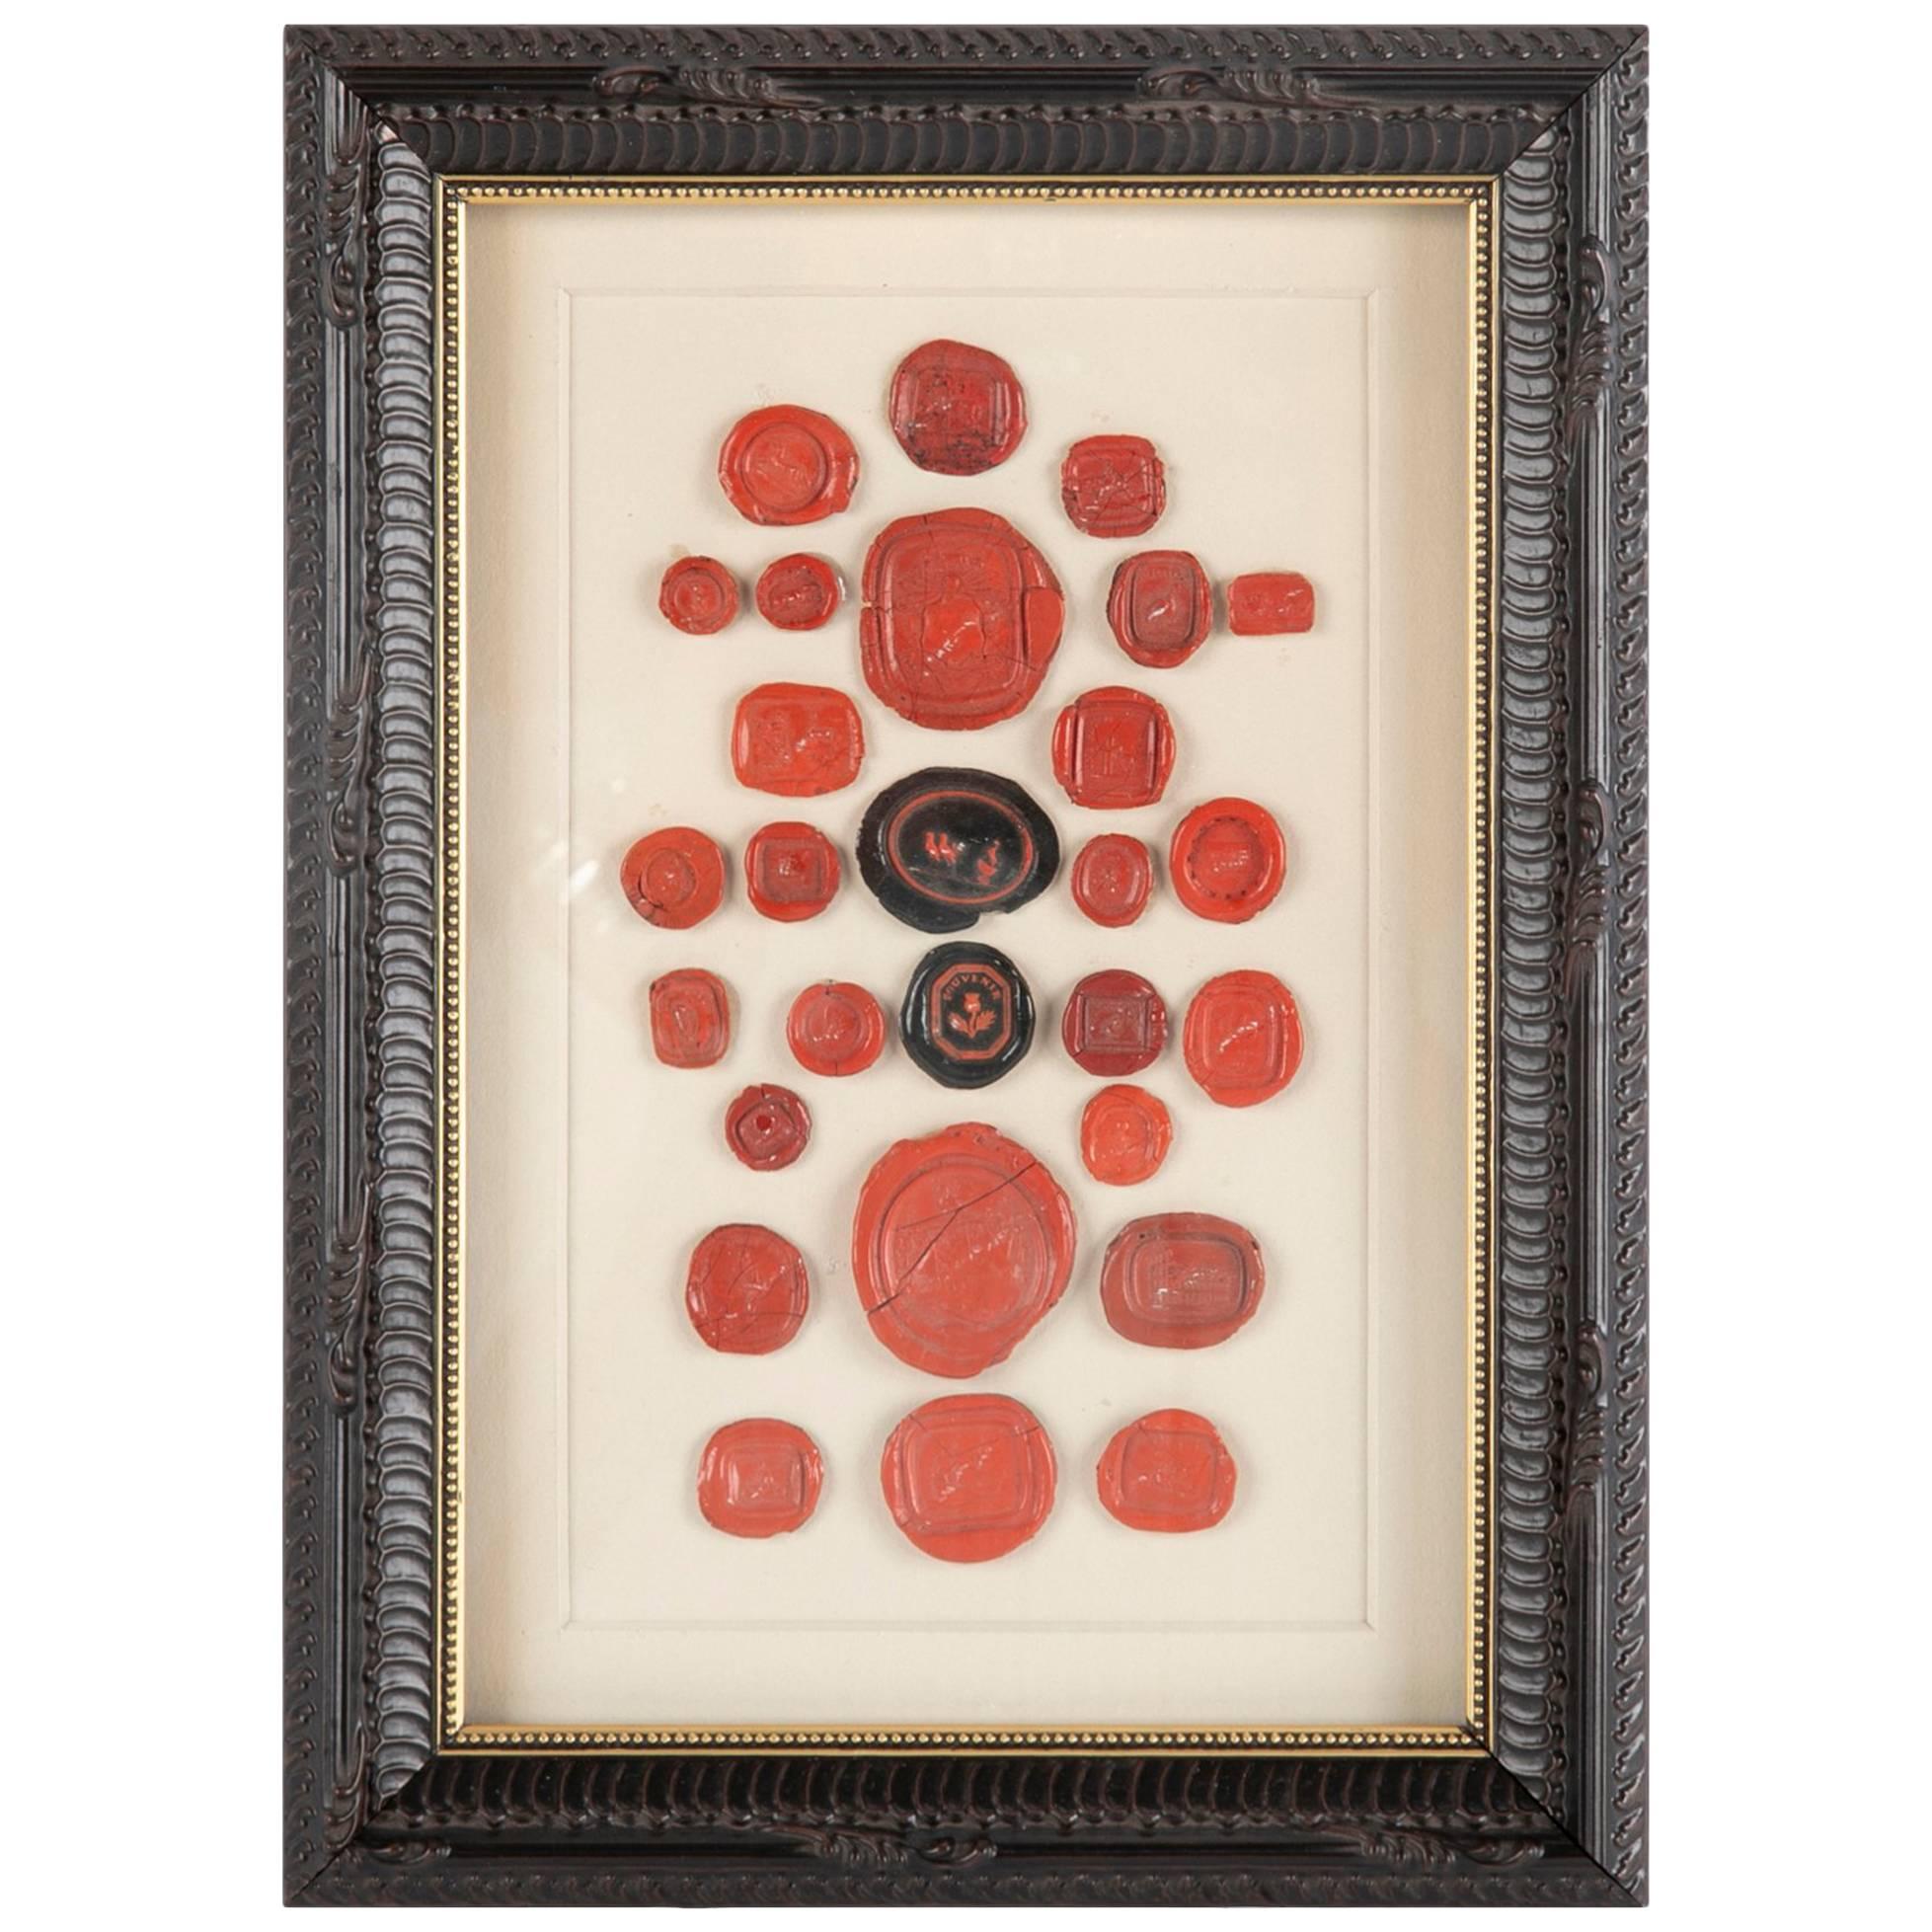 Wonderful collection of four framed groups of 18th-19th century Continental red and wax seals and intaglios from various European countries. Each one of these is a little piece of history, some quite whimsical. My current favorites are the red